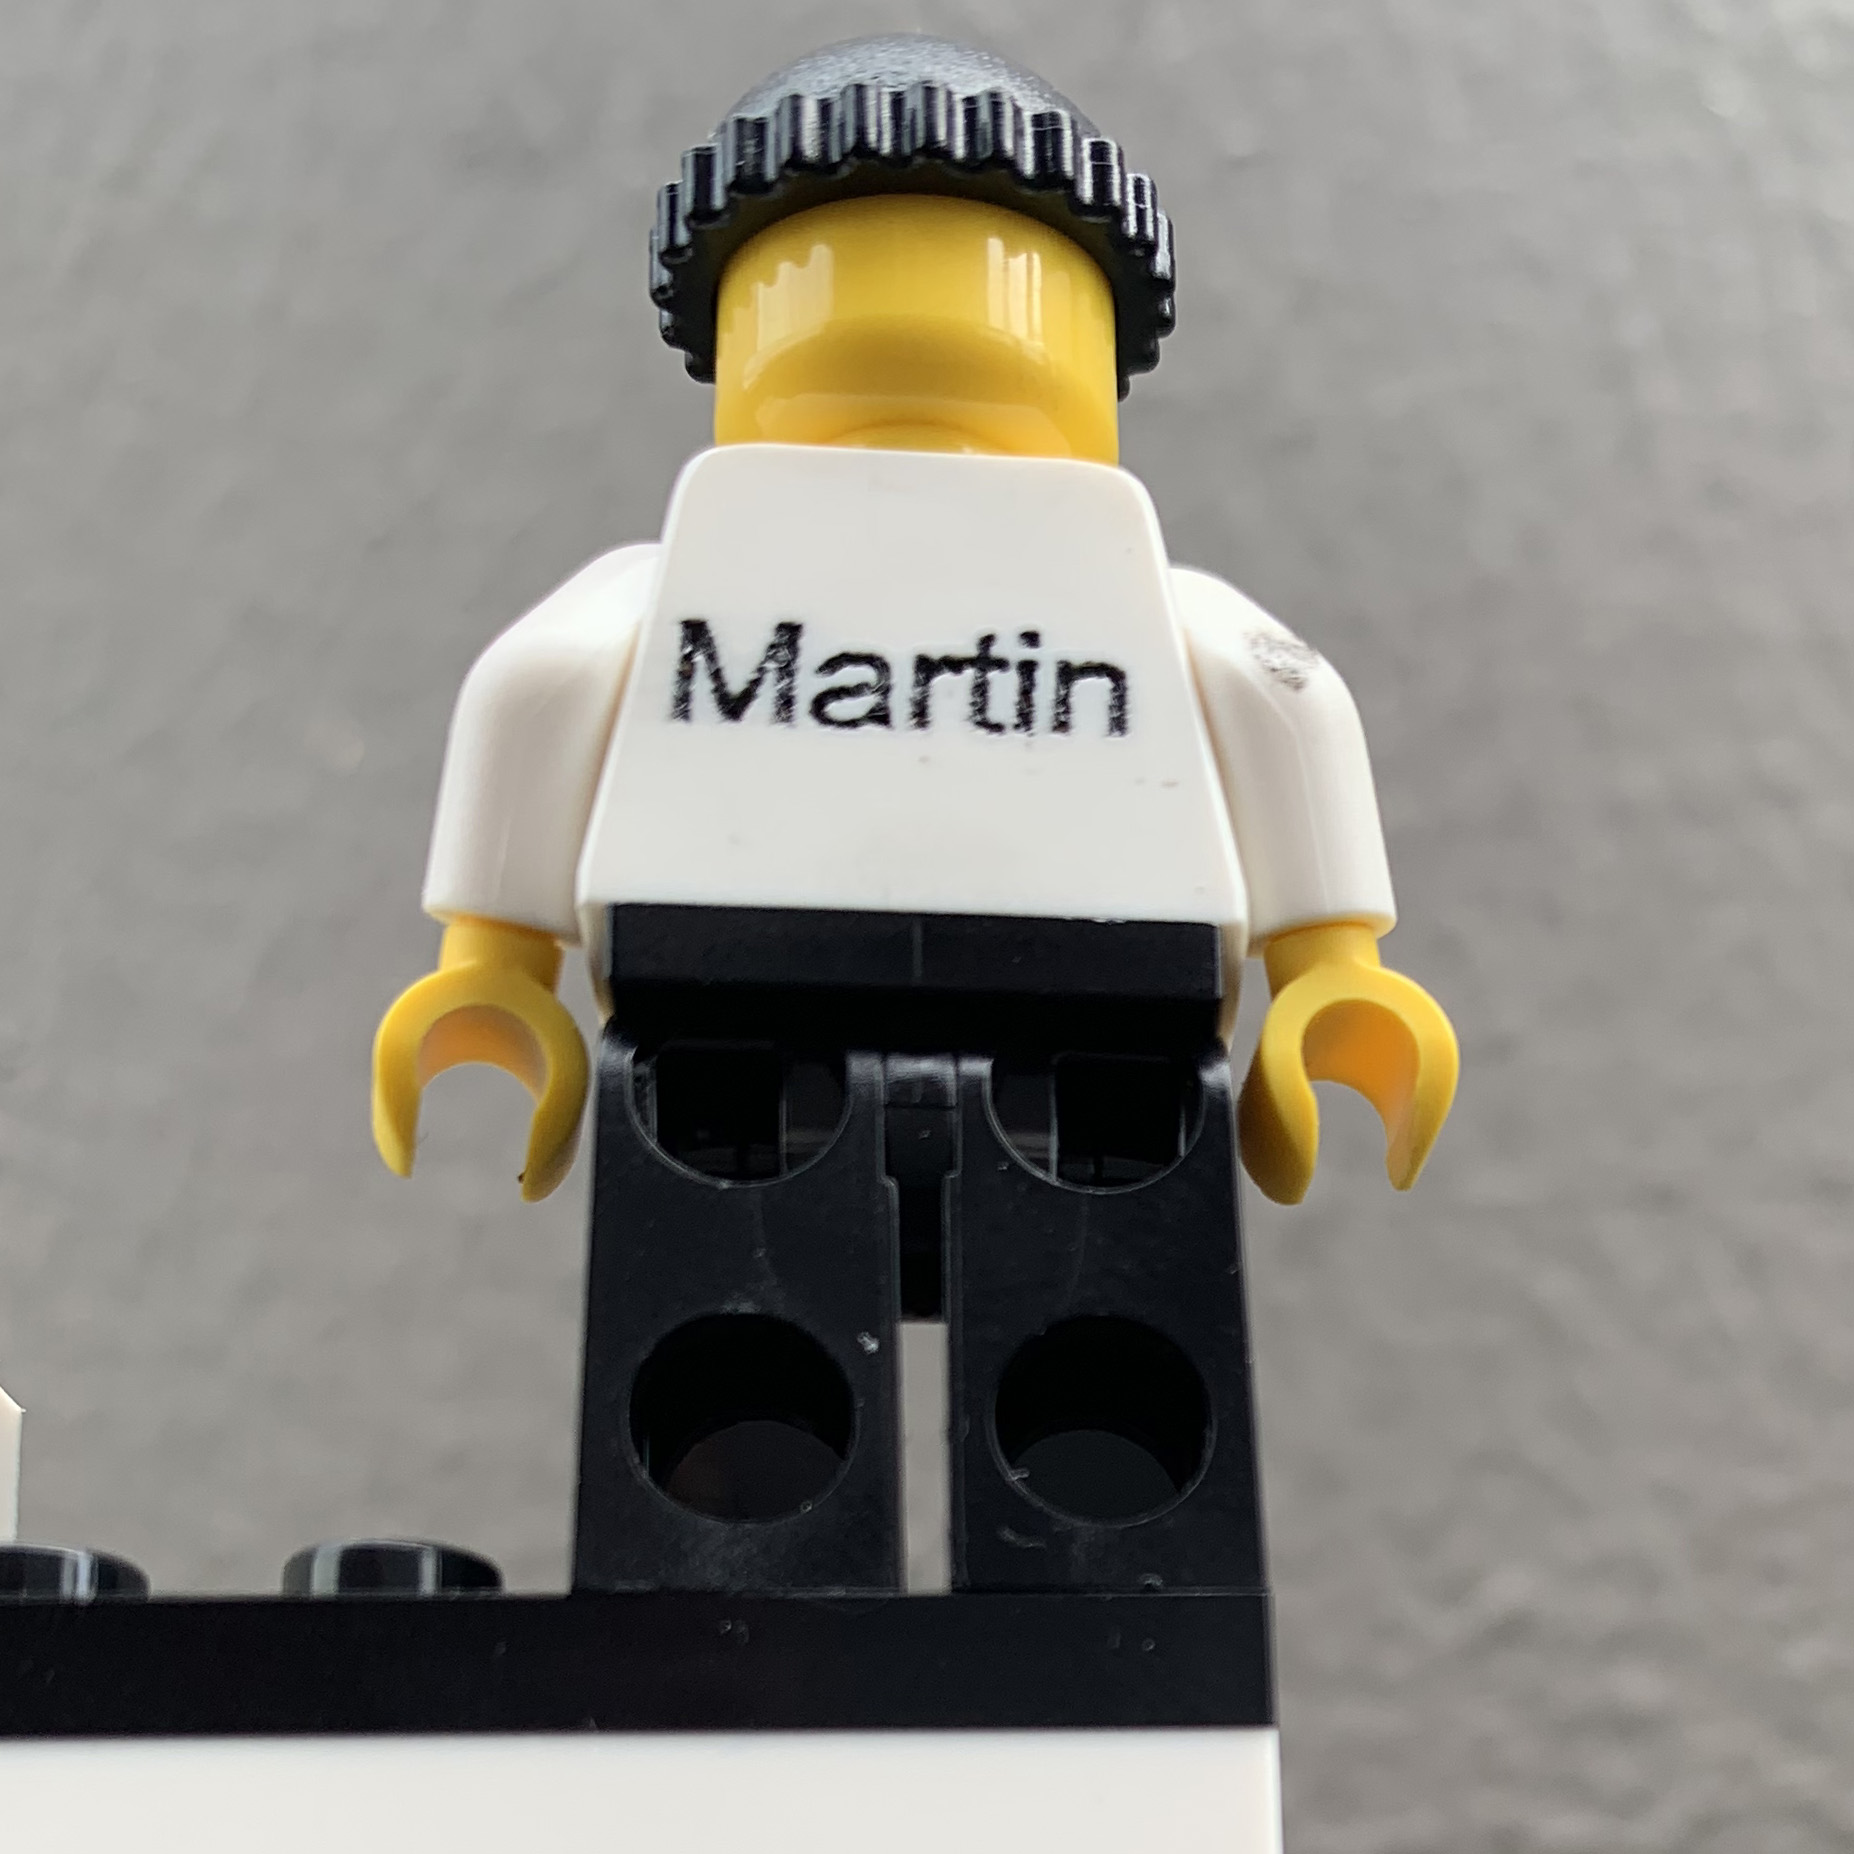 Laser Engraving: the name 'Martin' engraved on the back of a lego figure.